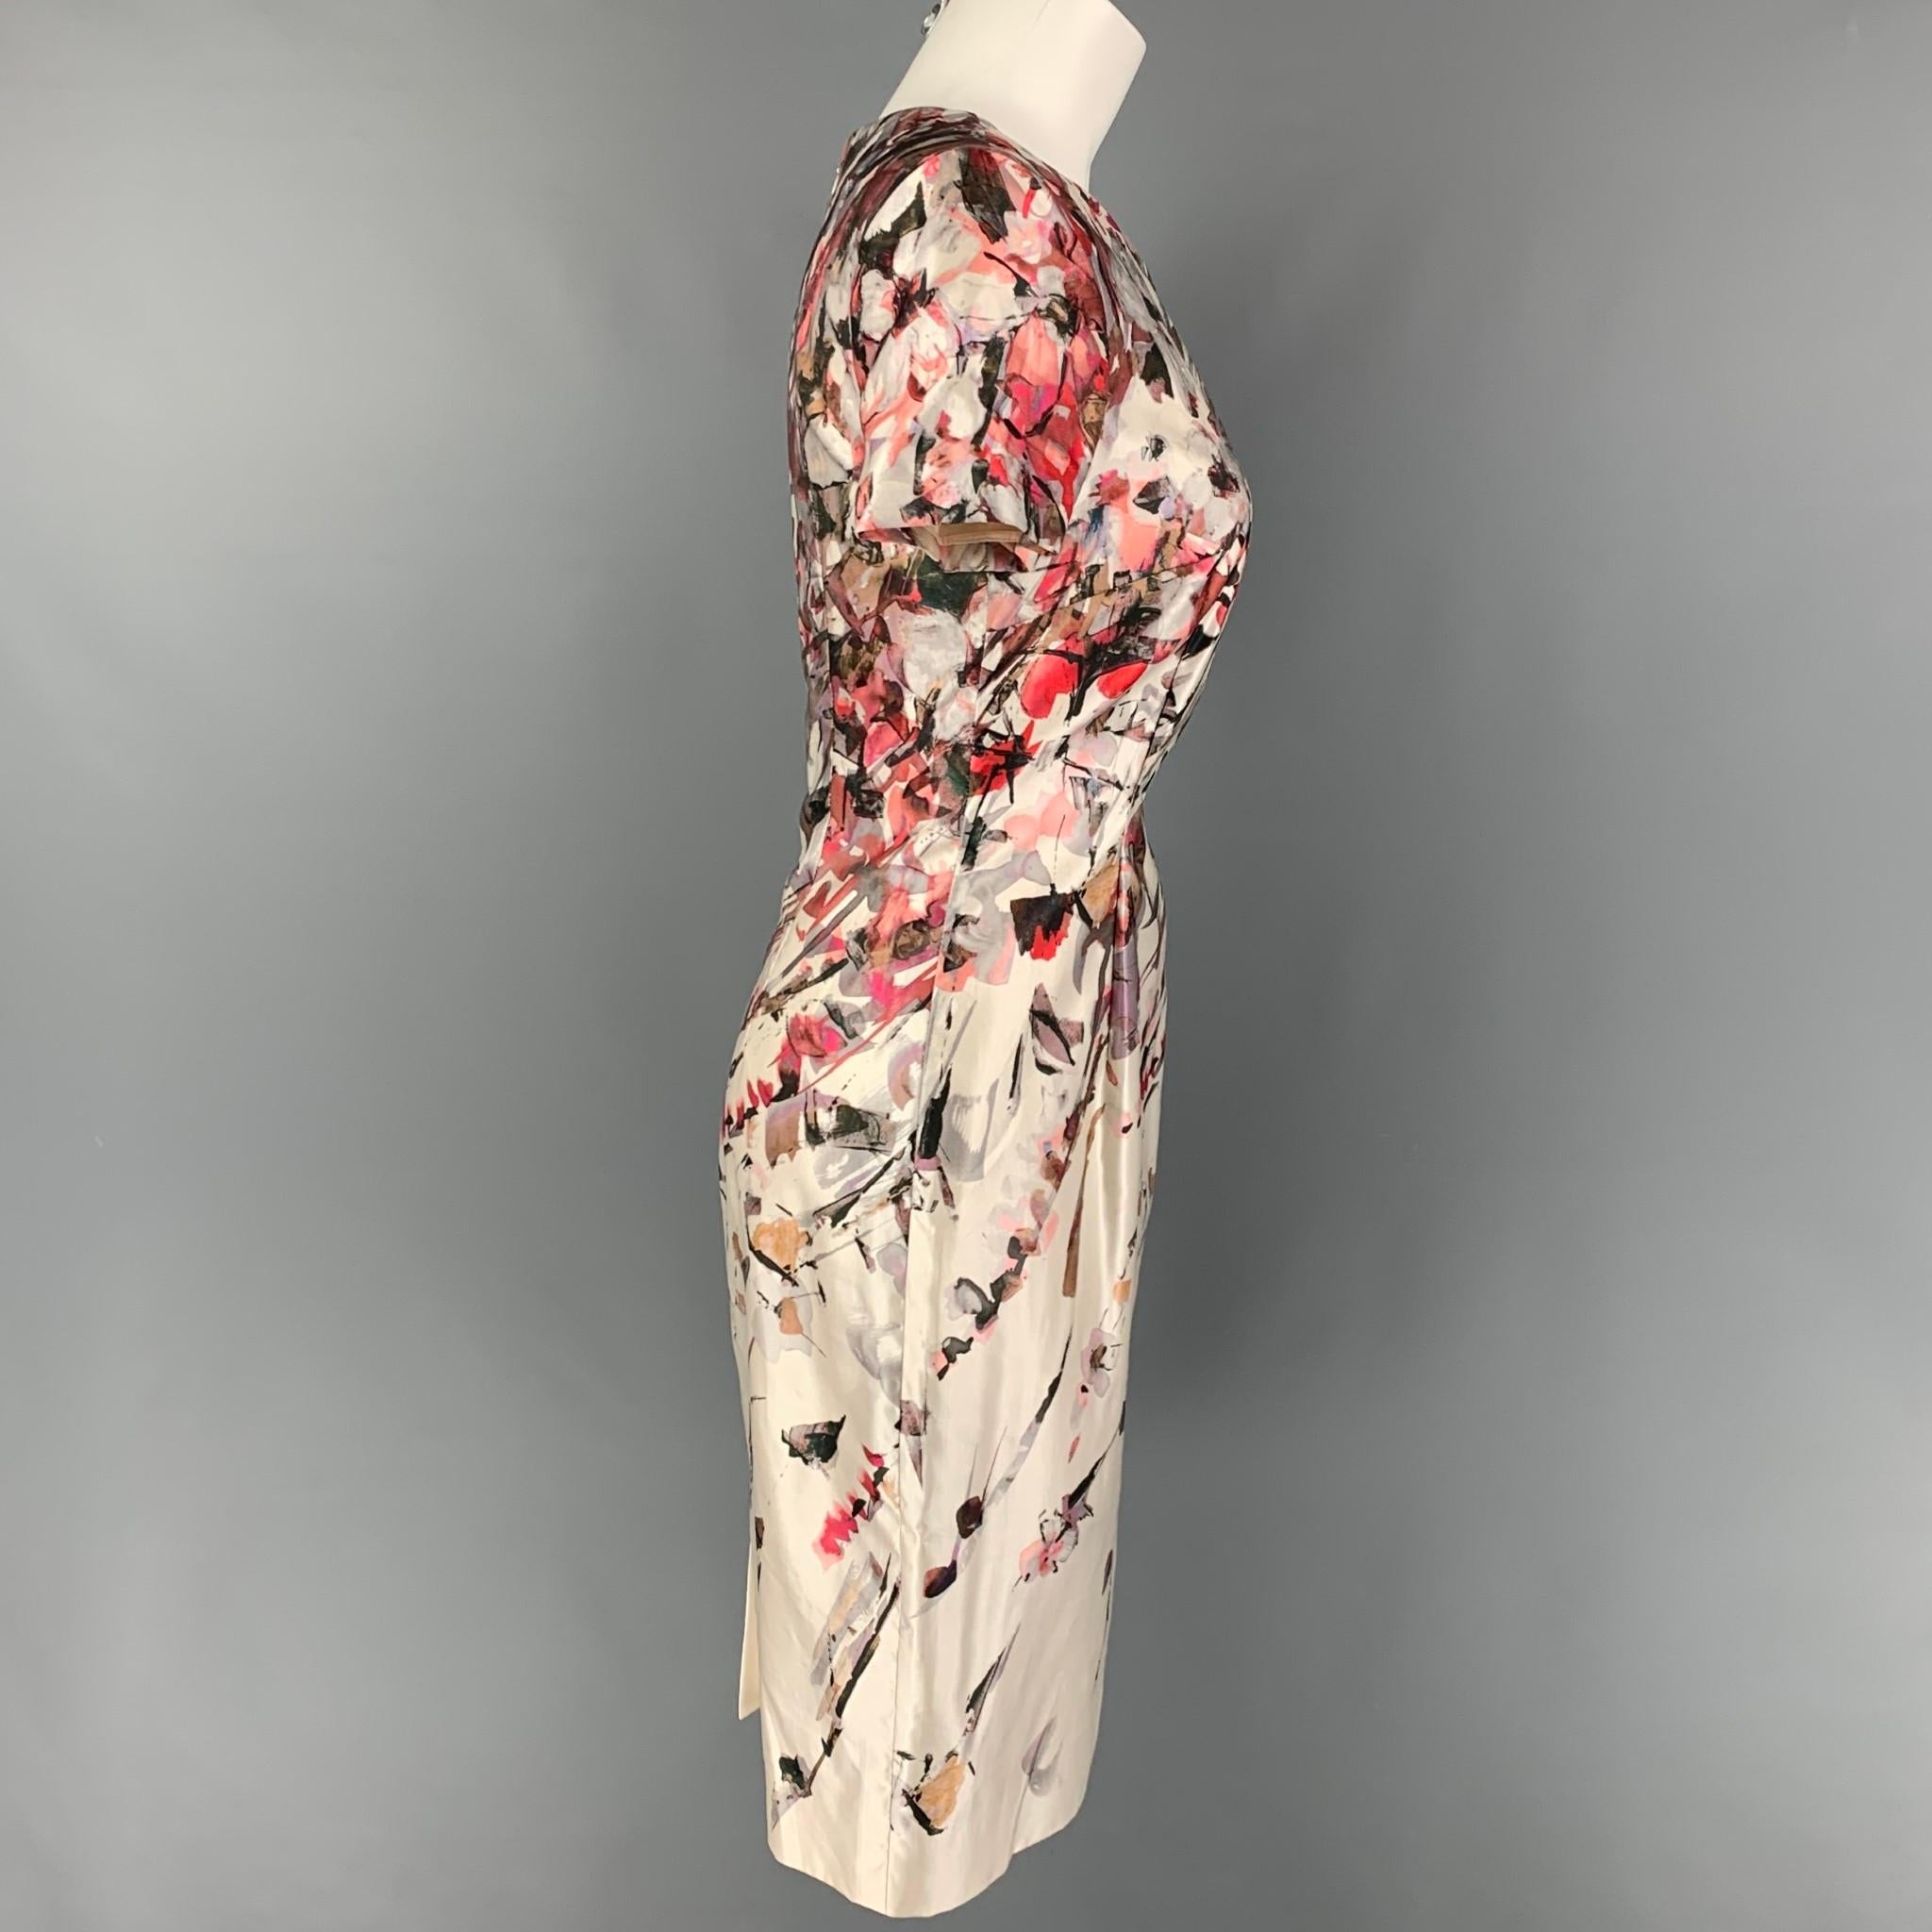 CAROLINA HERRERA dress comes in a cream & red abstract floral cotton featuring a pleated style, short sleeves, and a back zip up closure. Made in Italy. 

Very Good Pre-Owned Condition.
Marked: 4

Measurements:

Shoulder: 15 in.
Bust: 32 in.
Waist: